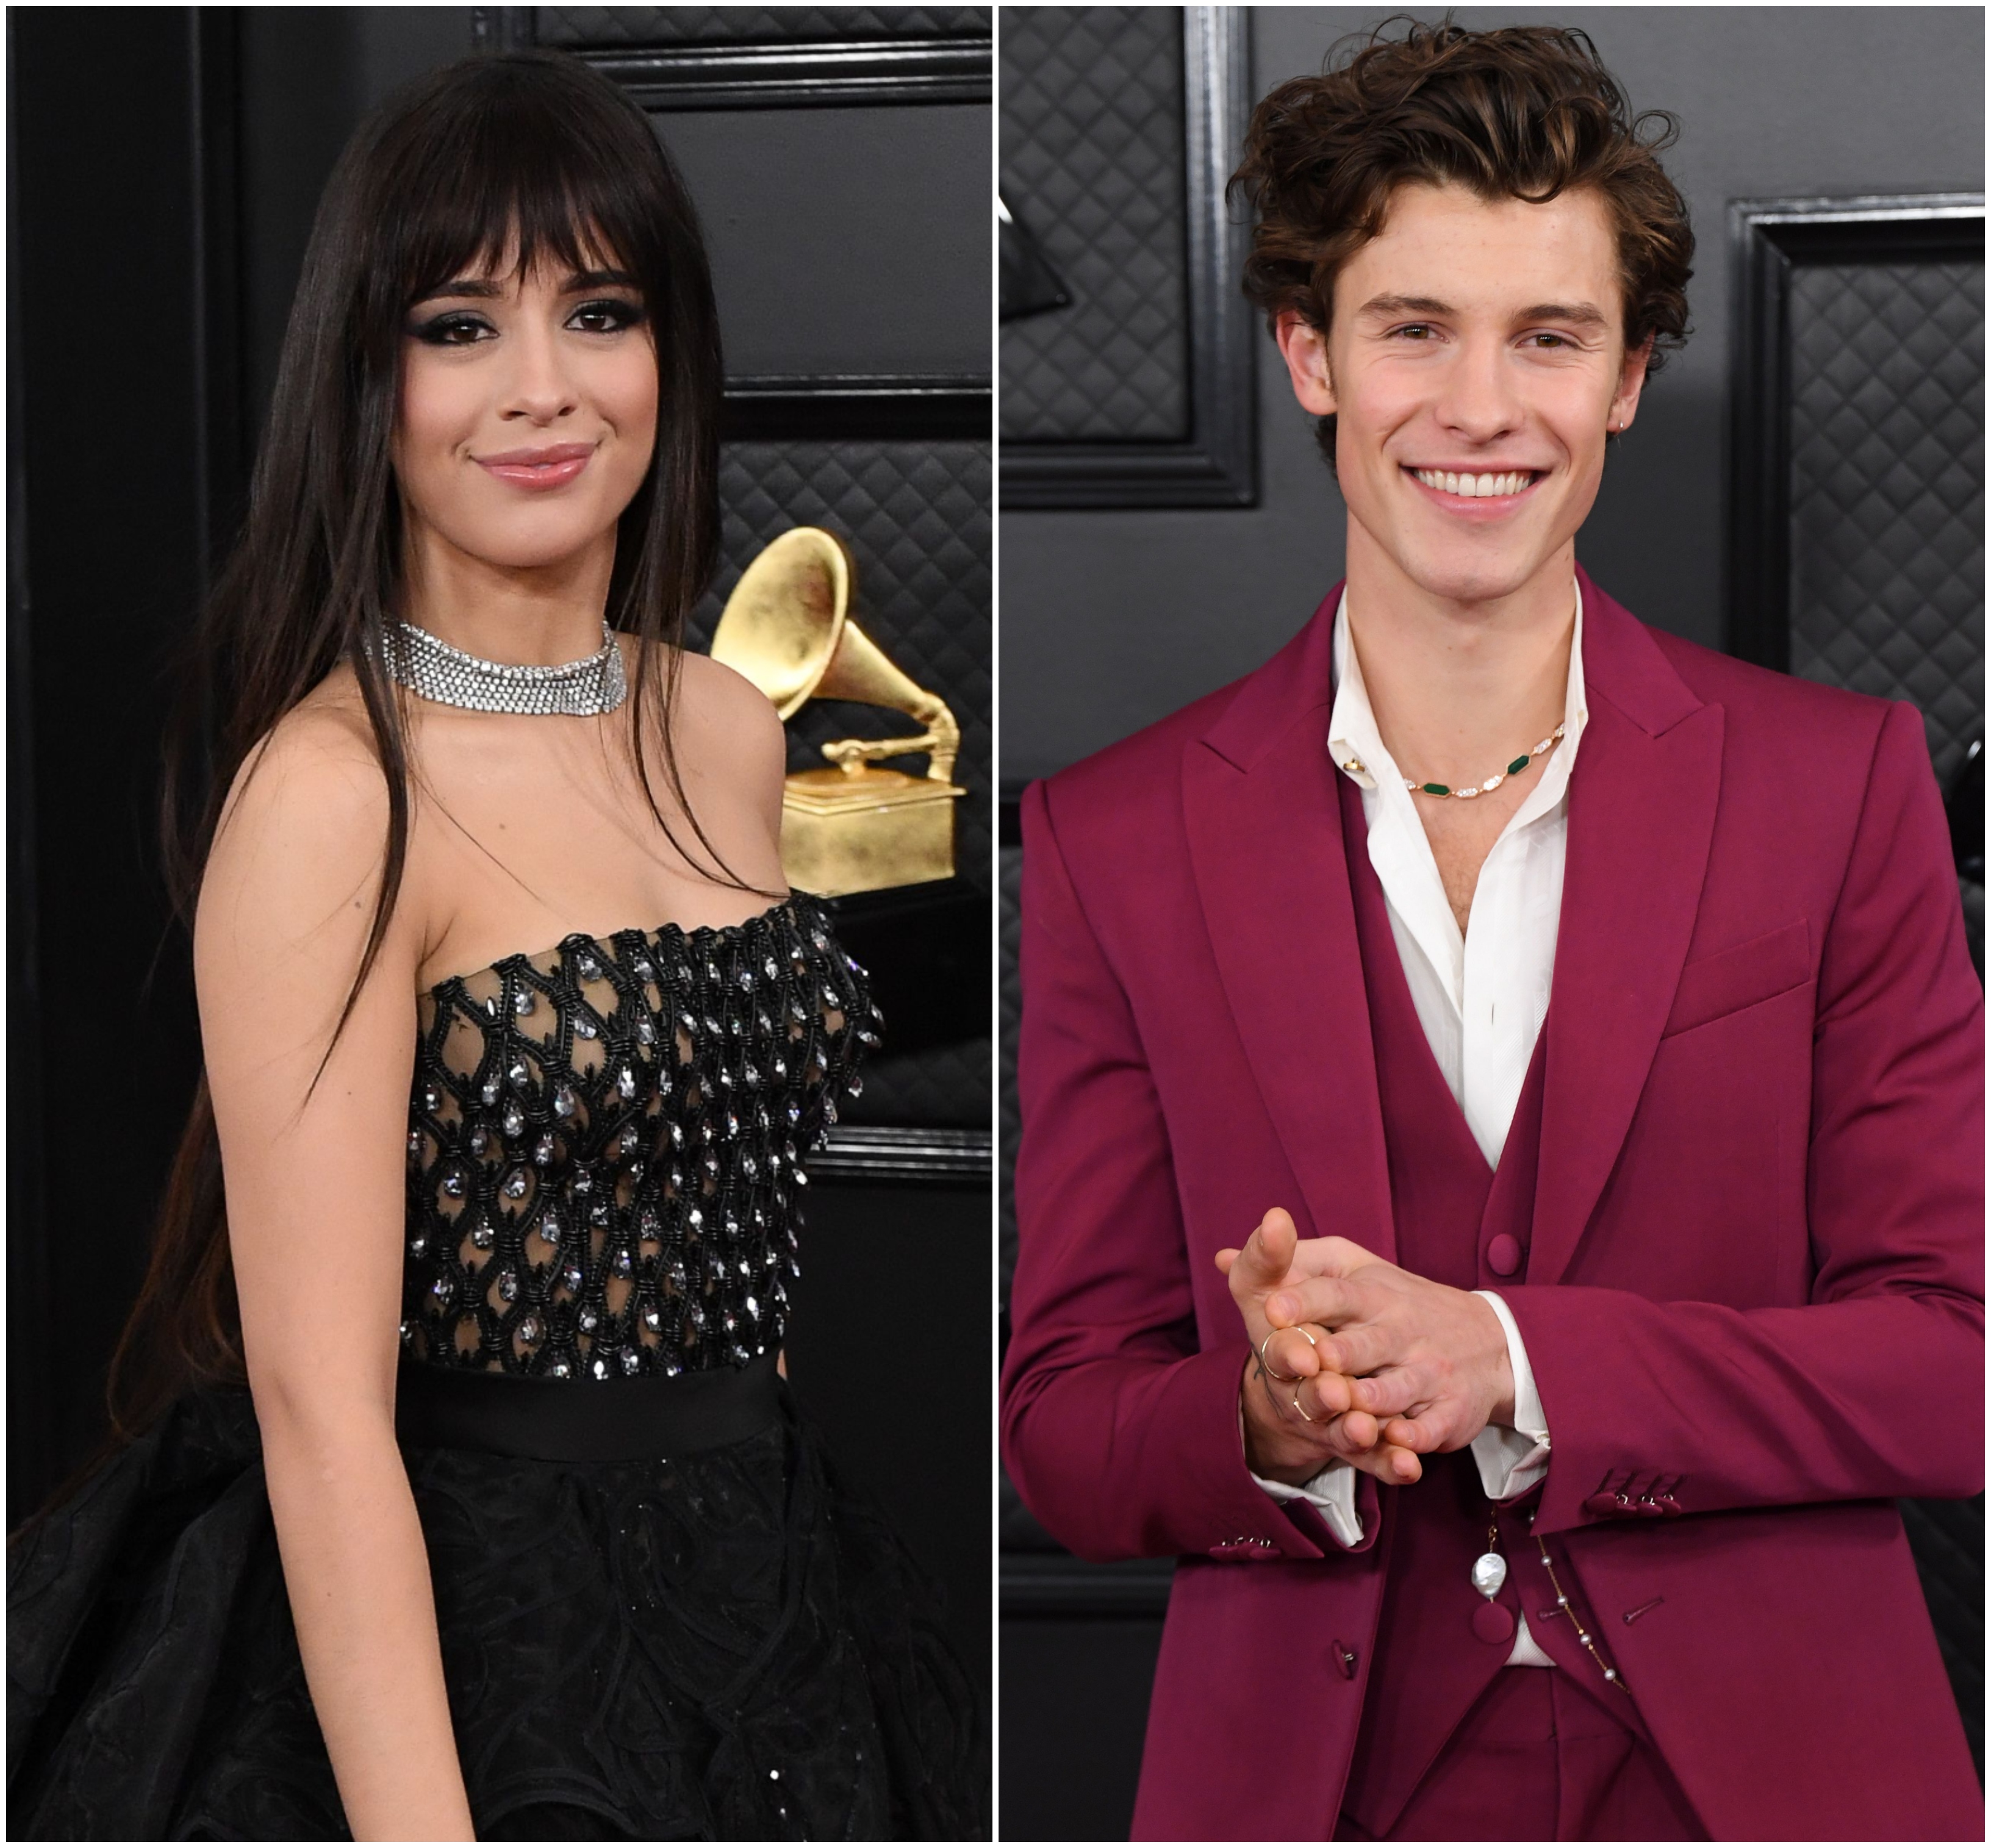 Camila Cabello And Shawn Mendes Arrive At 2020 Grammys Separately